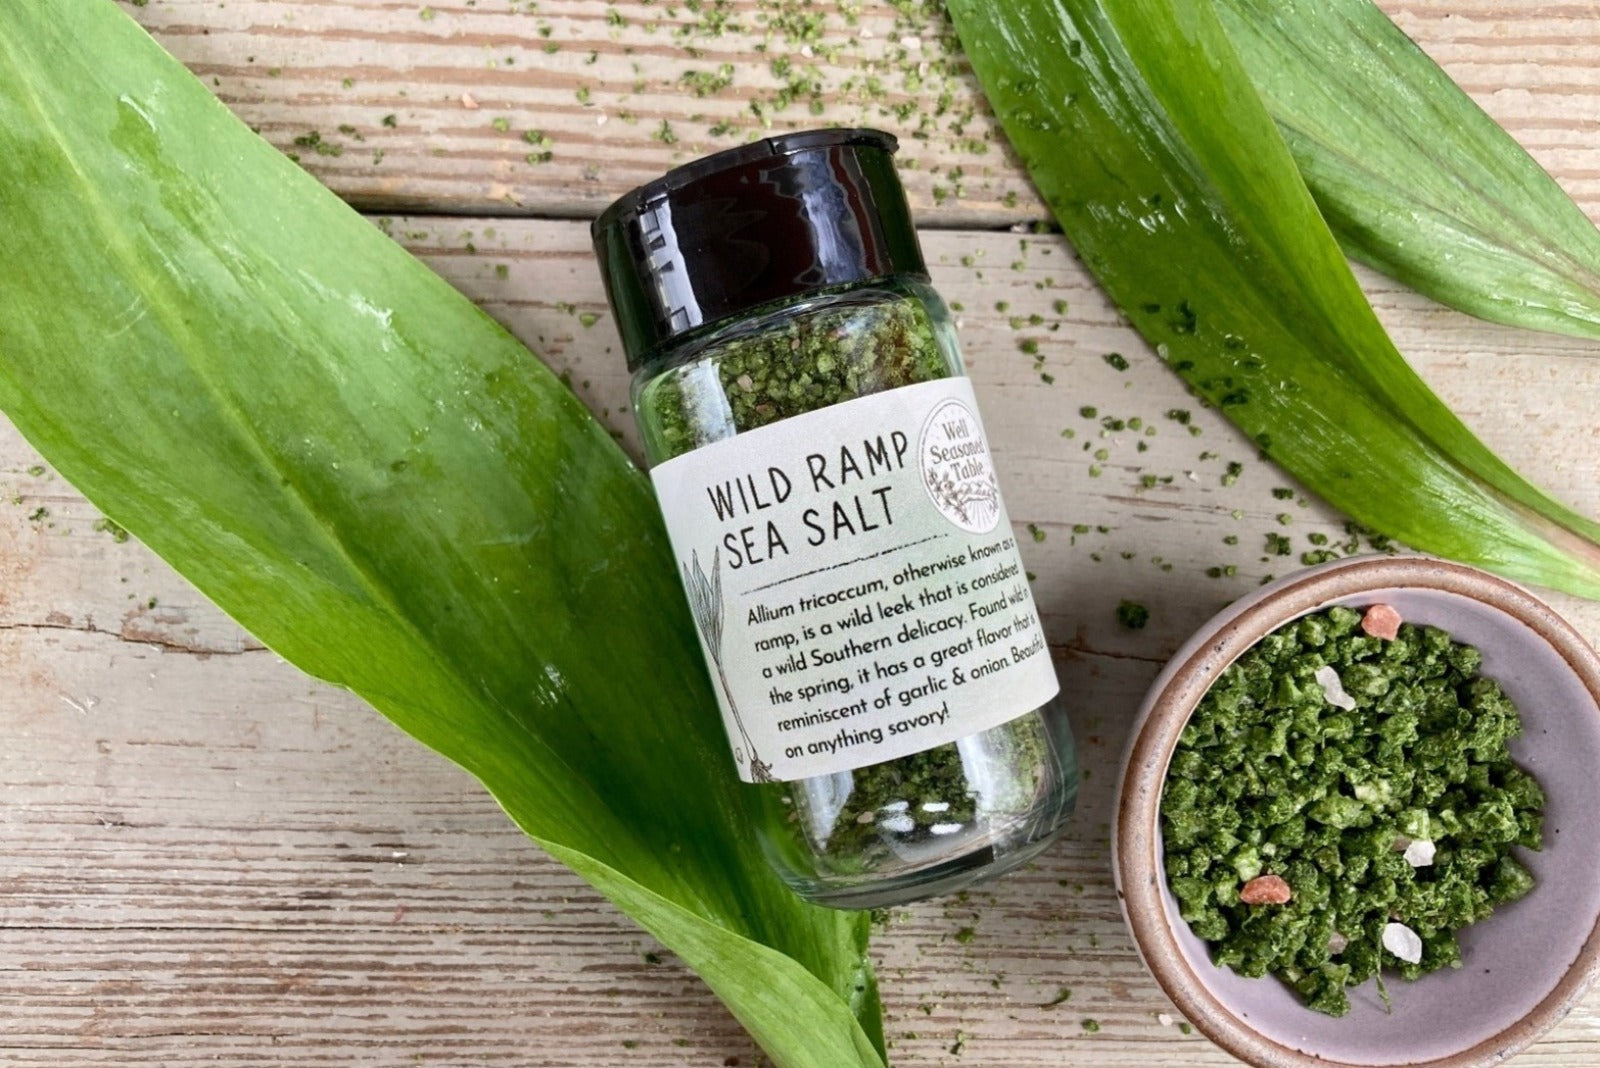 A glass shaker jar of Wild Ramp Sea Salt from Well Seasoned Table on a wooden background with a green ceramic mini bowl of bright green infused sea salt.